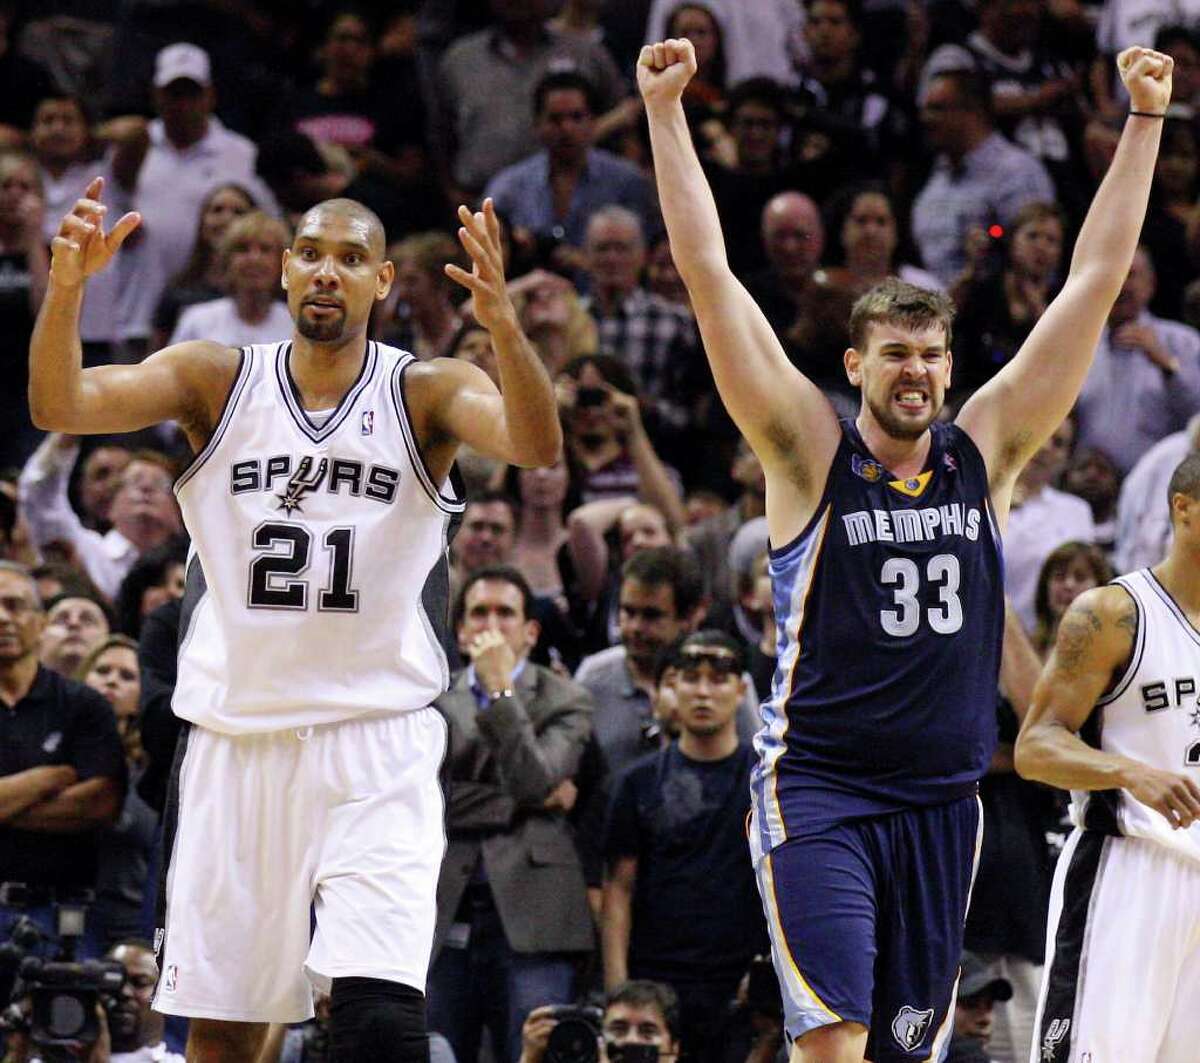 FOR SPORTS - San Antonio Spurs' Tim Duncan (left) reacts at the end of the game as Memphis Grizzlies' Marc Gasol celebrates in game one of the NBA Western Conference First Round at the AT&T Center Sunday April 17, 2011. The Grizzlies won 101-98. (PHOTO BY EDWARD A. ORNELAS/eaornelas@express-news.net)